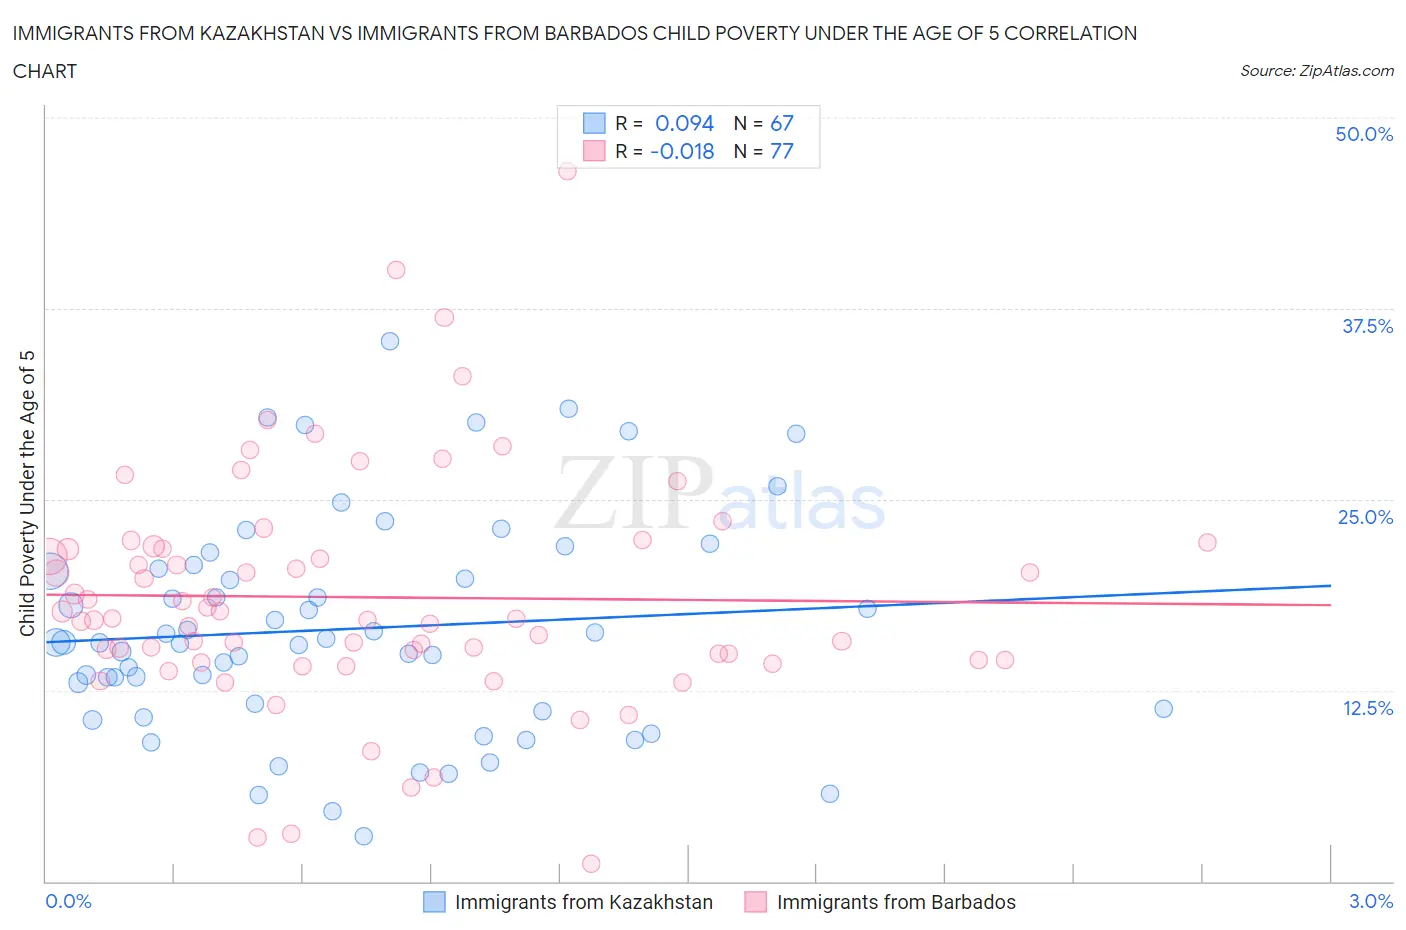 Immigrants from Kazakhstan vs Immigrants from Barbados Child Poverty Under the Age of 5